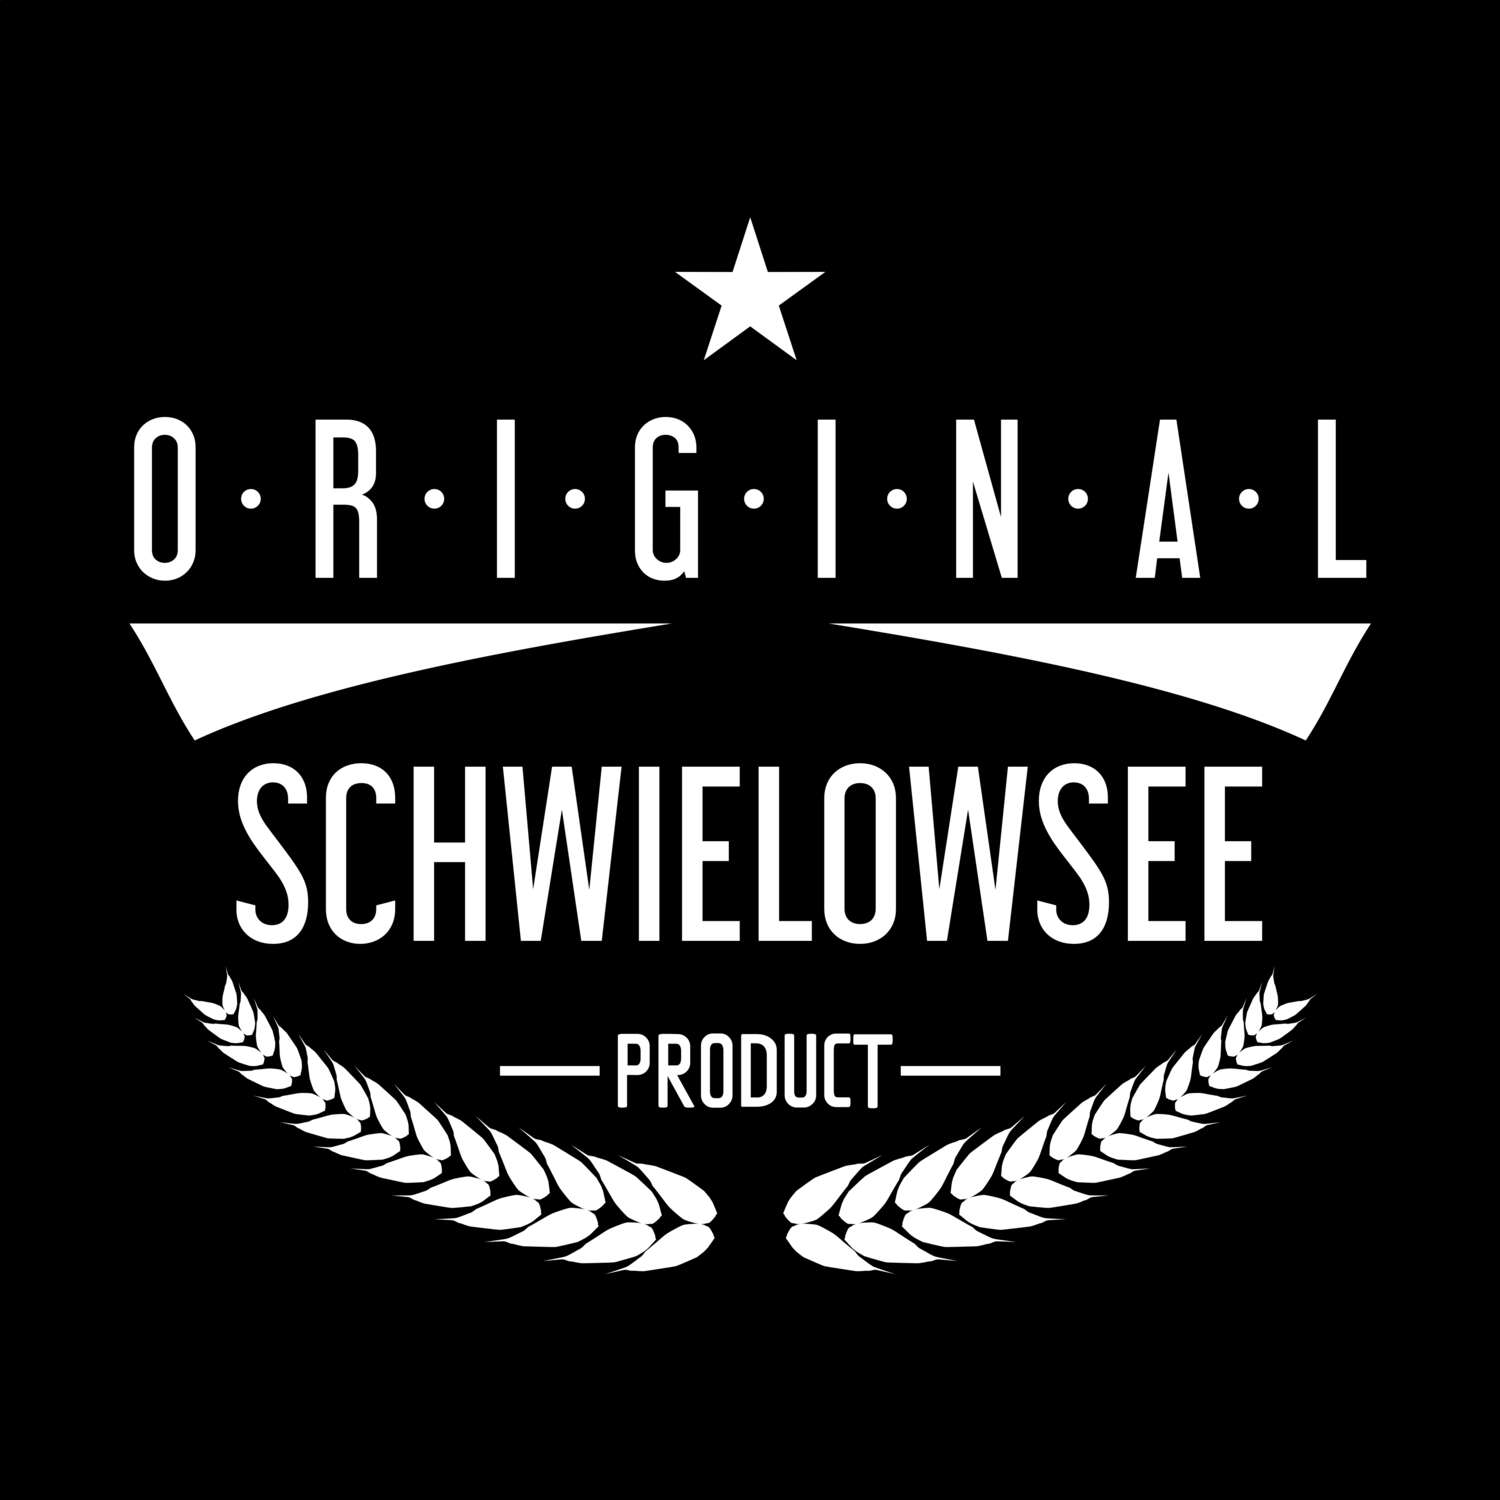 Schwielowsee T-Shirt »Original Product«